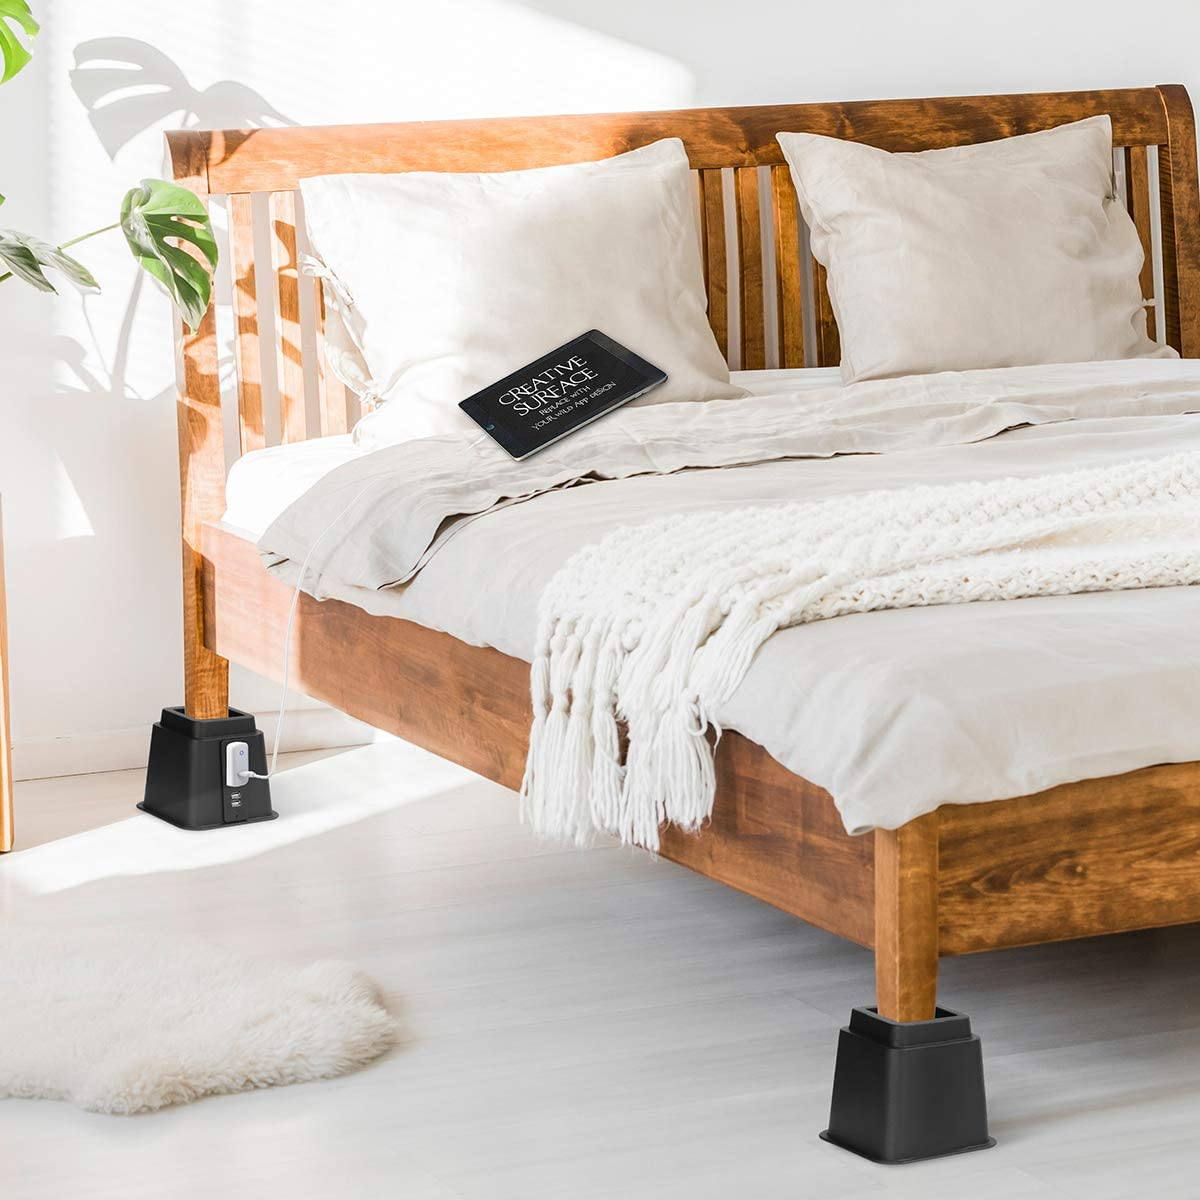 Use bed risers to increase under-bed storage to fit more items along with a sleigh bed in a small apartment bedroom.